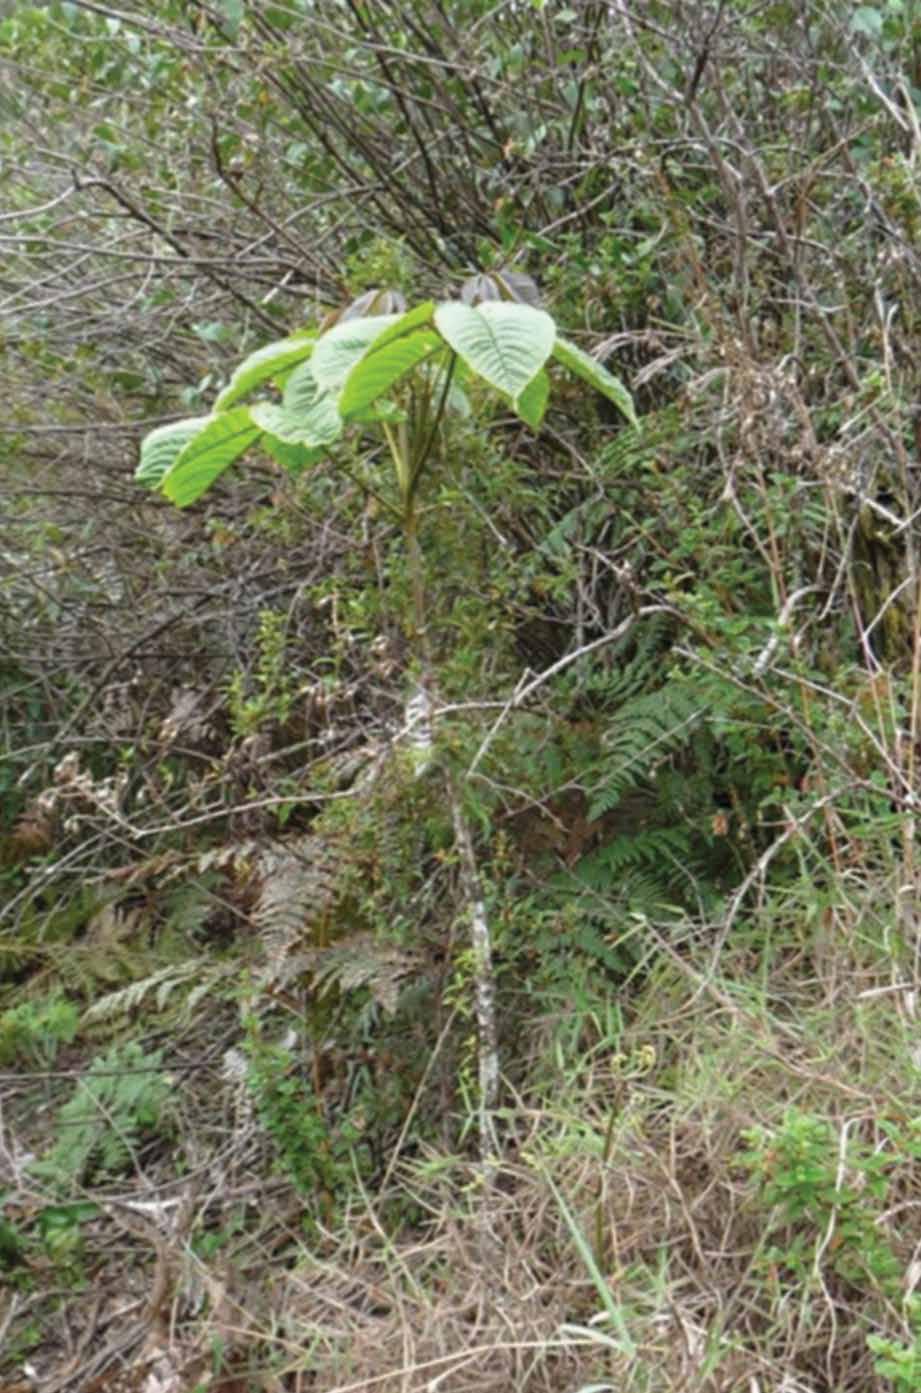 Native trees from tropical areas; Handroanthus chrysanthus (synonym Tabebuia chrysantha, guayacan), inoculated with AMF inocula for reforestation and restoration approaches in Southern Ecuador.